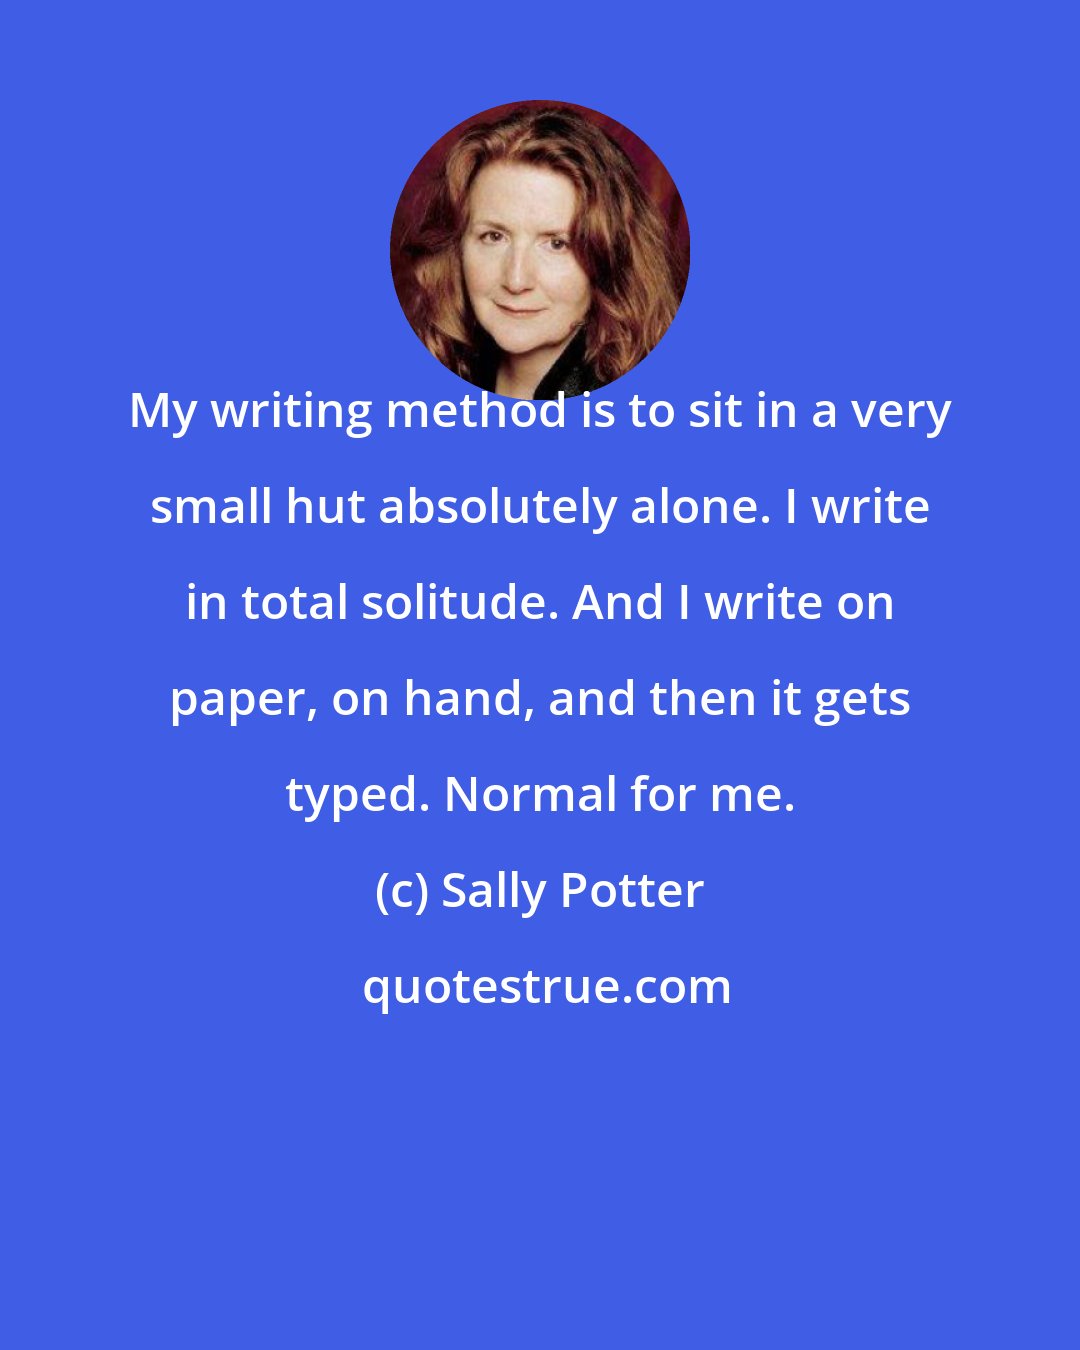 Sally Potter: My writing method is to sit in a very small hut absolutely alone. I write in total solitude. And I write on paper, on hand, and then it gets typed. Normal for me.